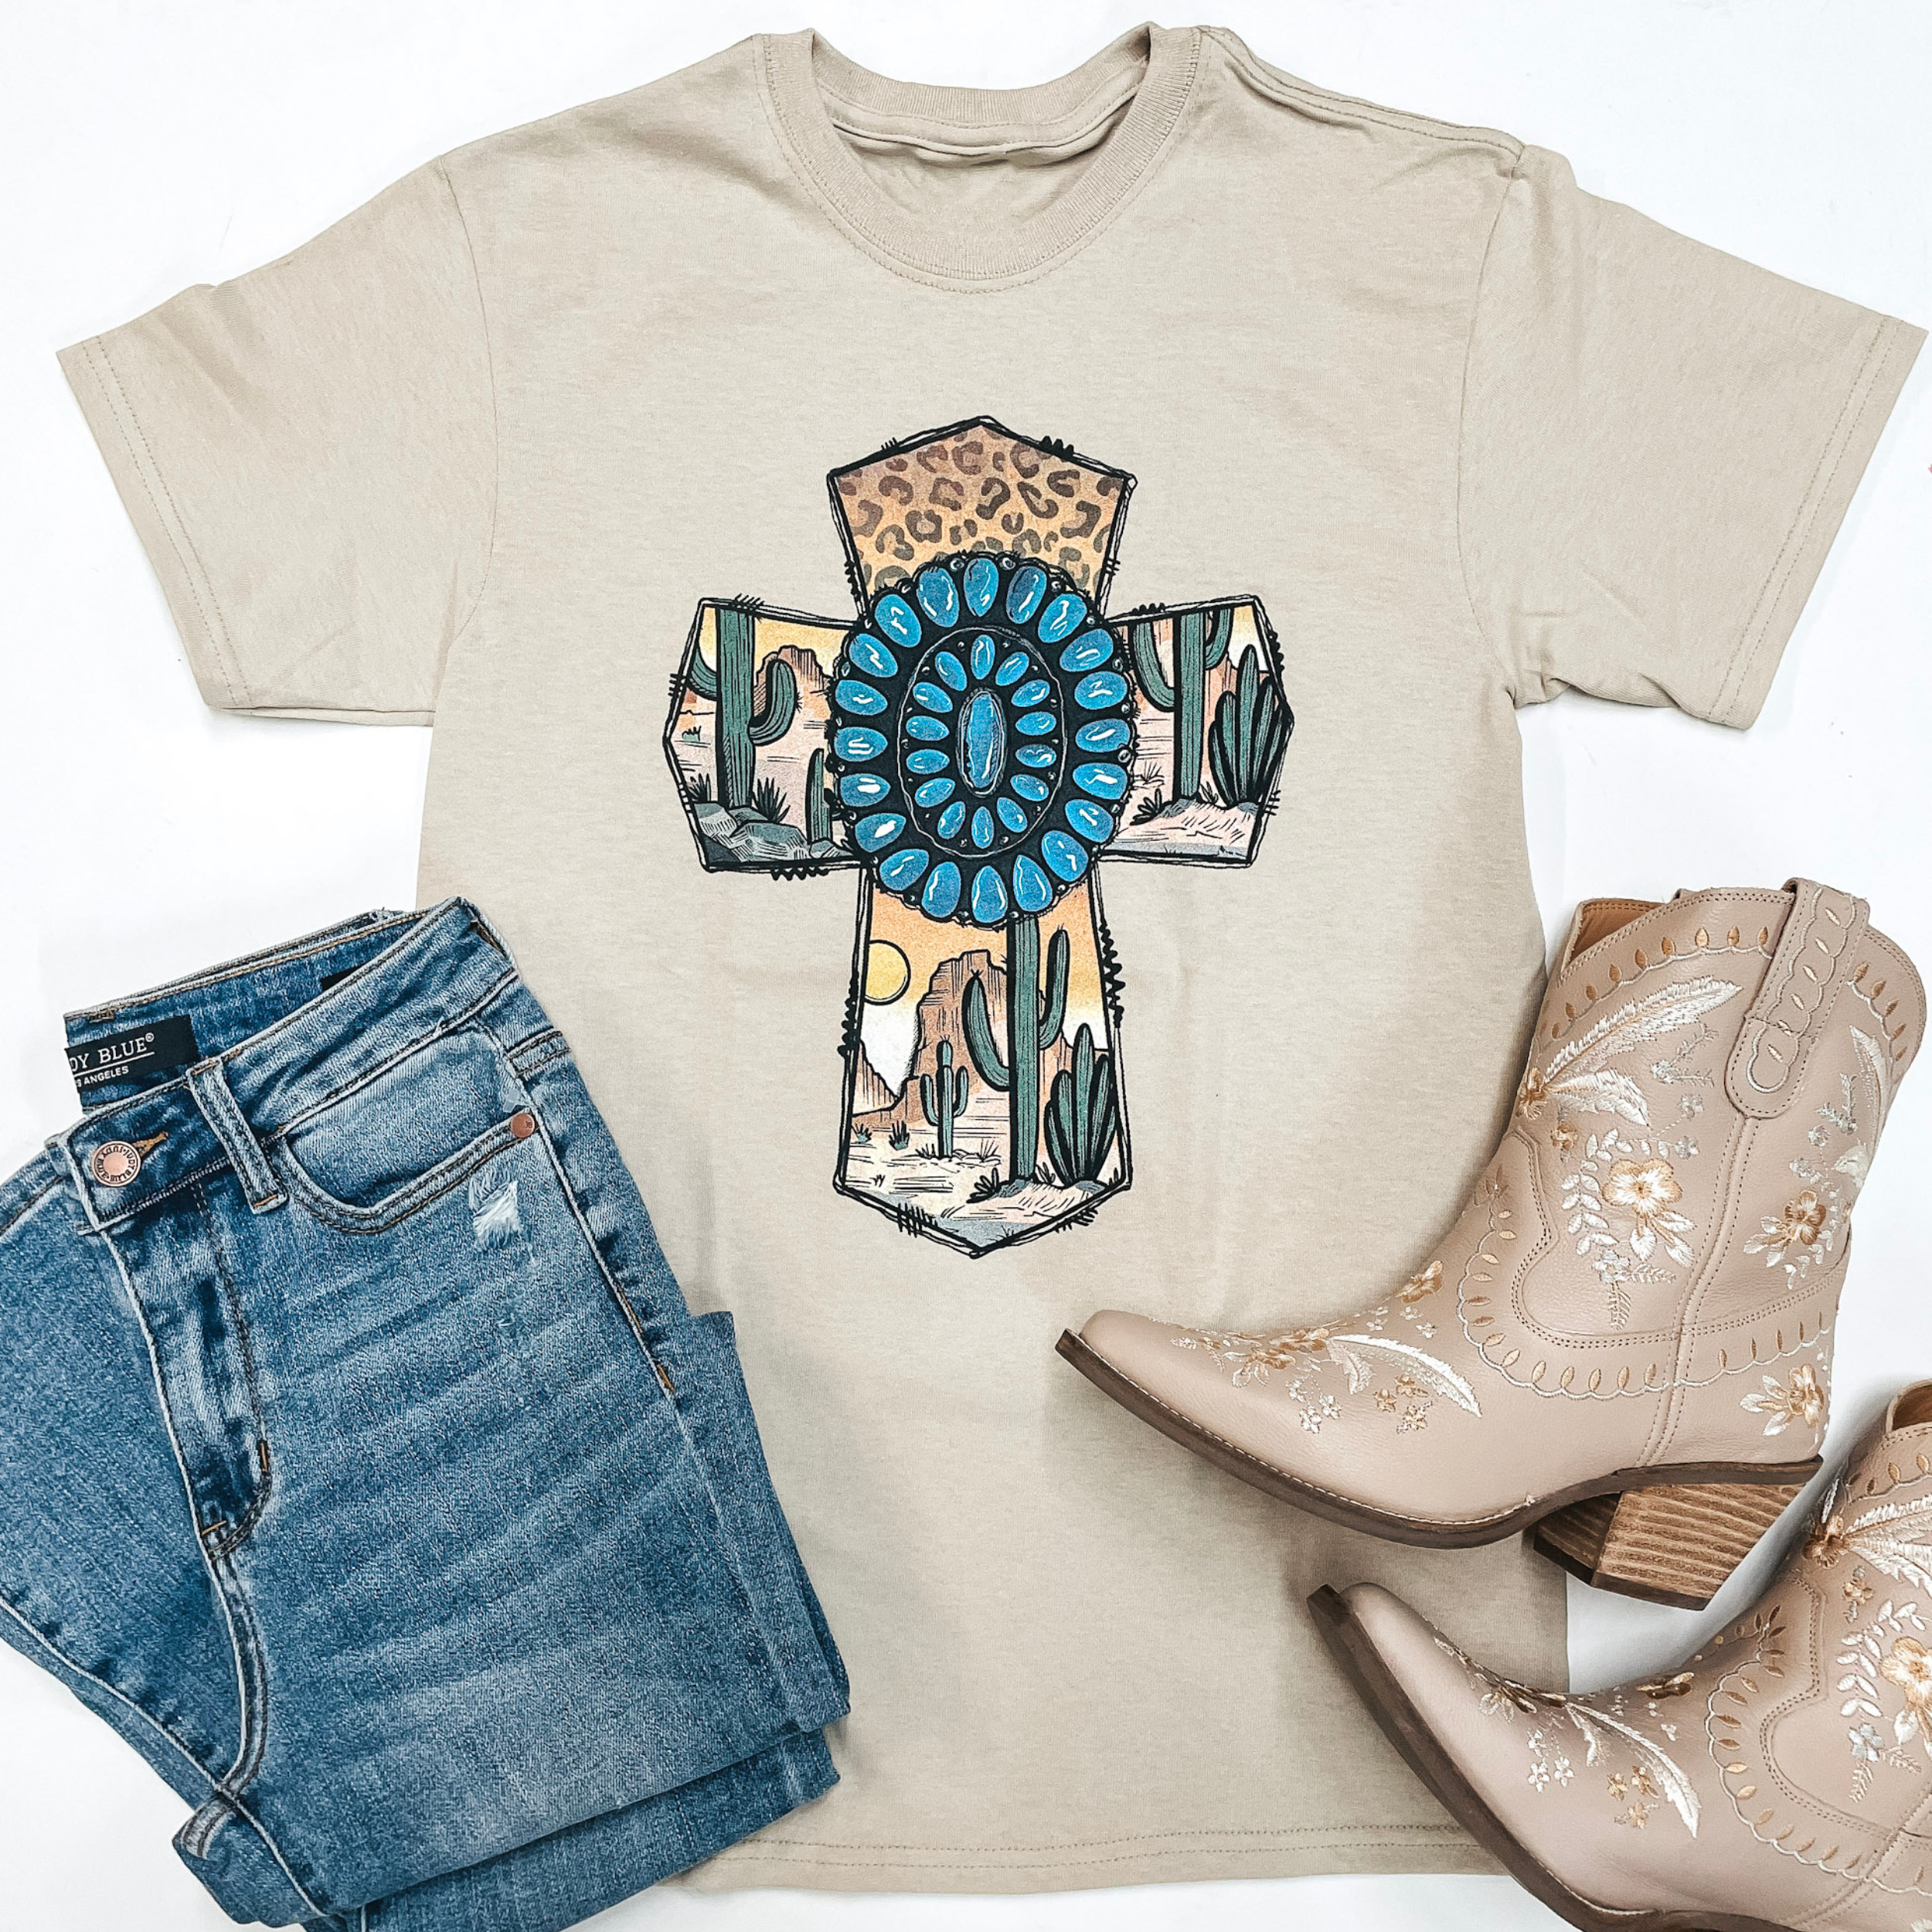 A beige tee is in the center of the picture on top of a white background. In the center of the tee is a cross, outlined in barbwire, with a desert scene inside of it. A turquoise stone sits in the center of the cross. Light wash jeans are on the bottom left side of the picture and cream color boots are on the right. 